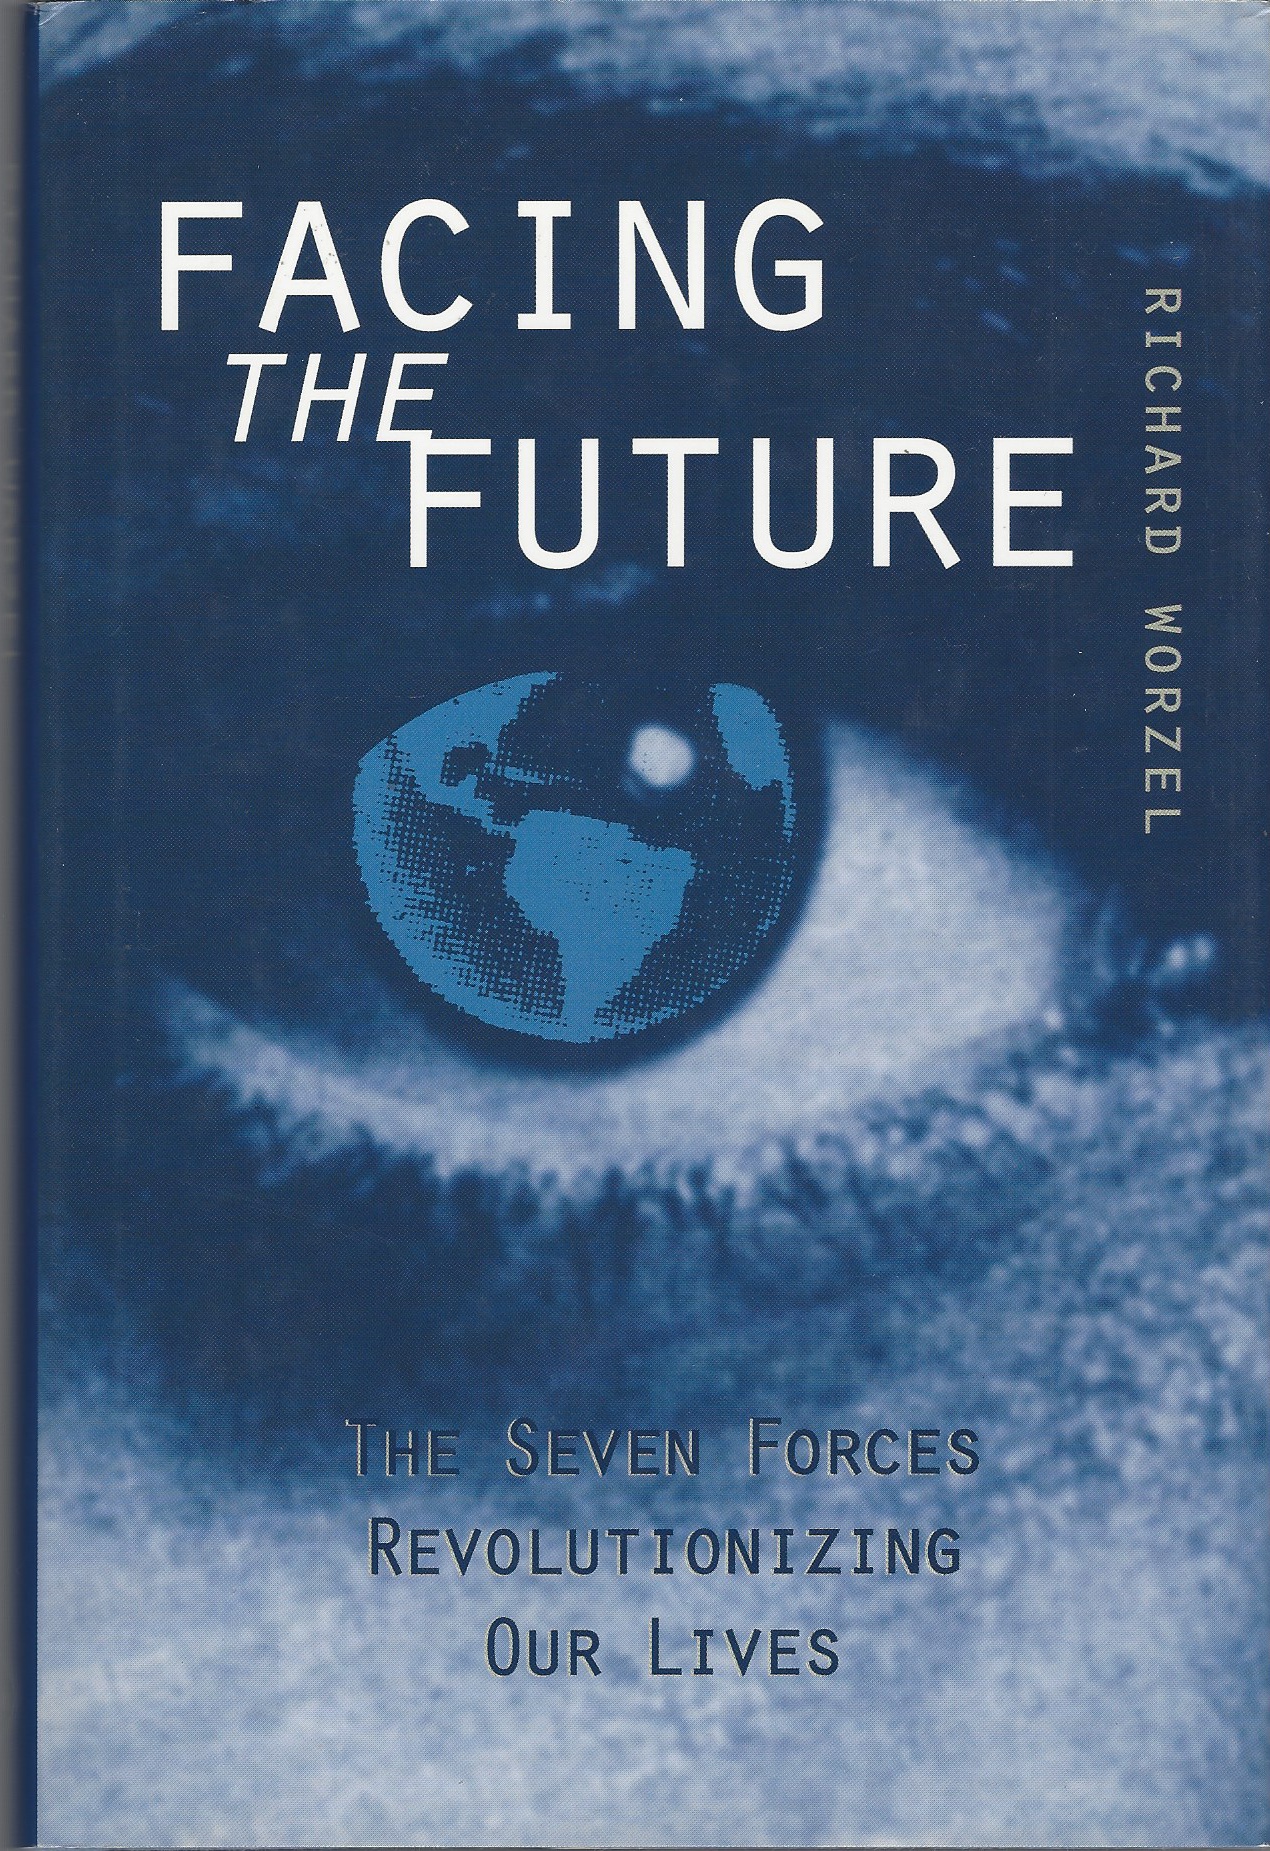 WORZEL, RICHARD - Facing the Future ** Signed ** the Seven Forces Revolutionizing Our Lives.